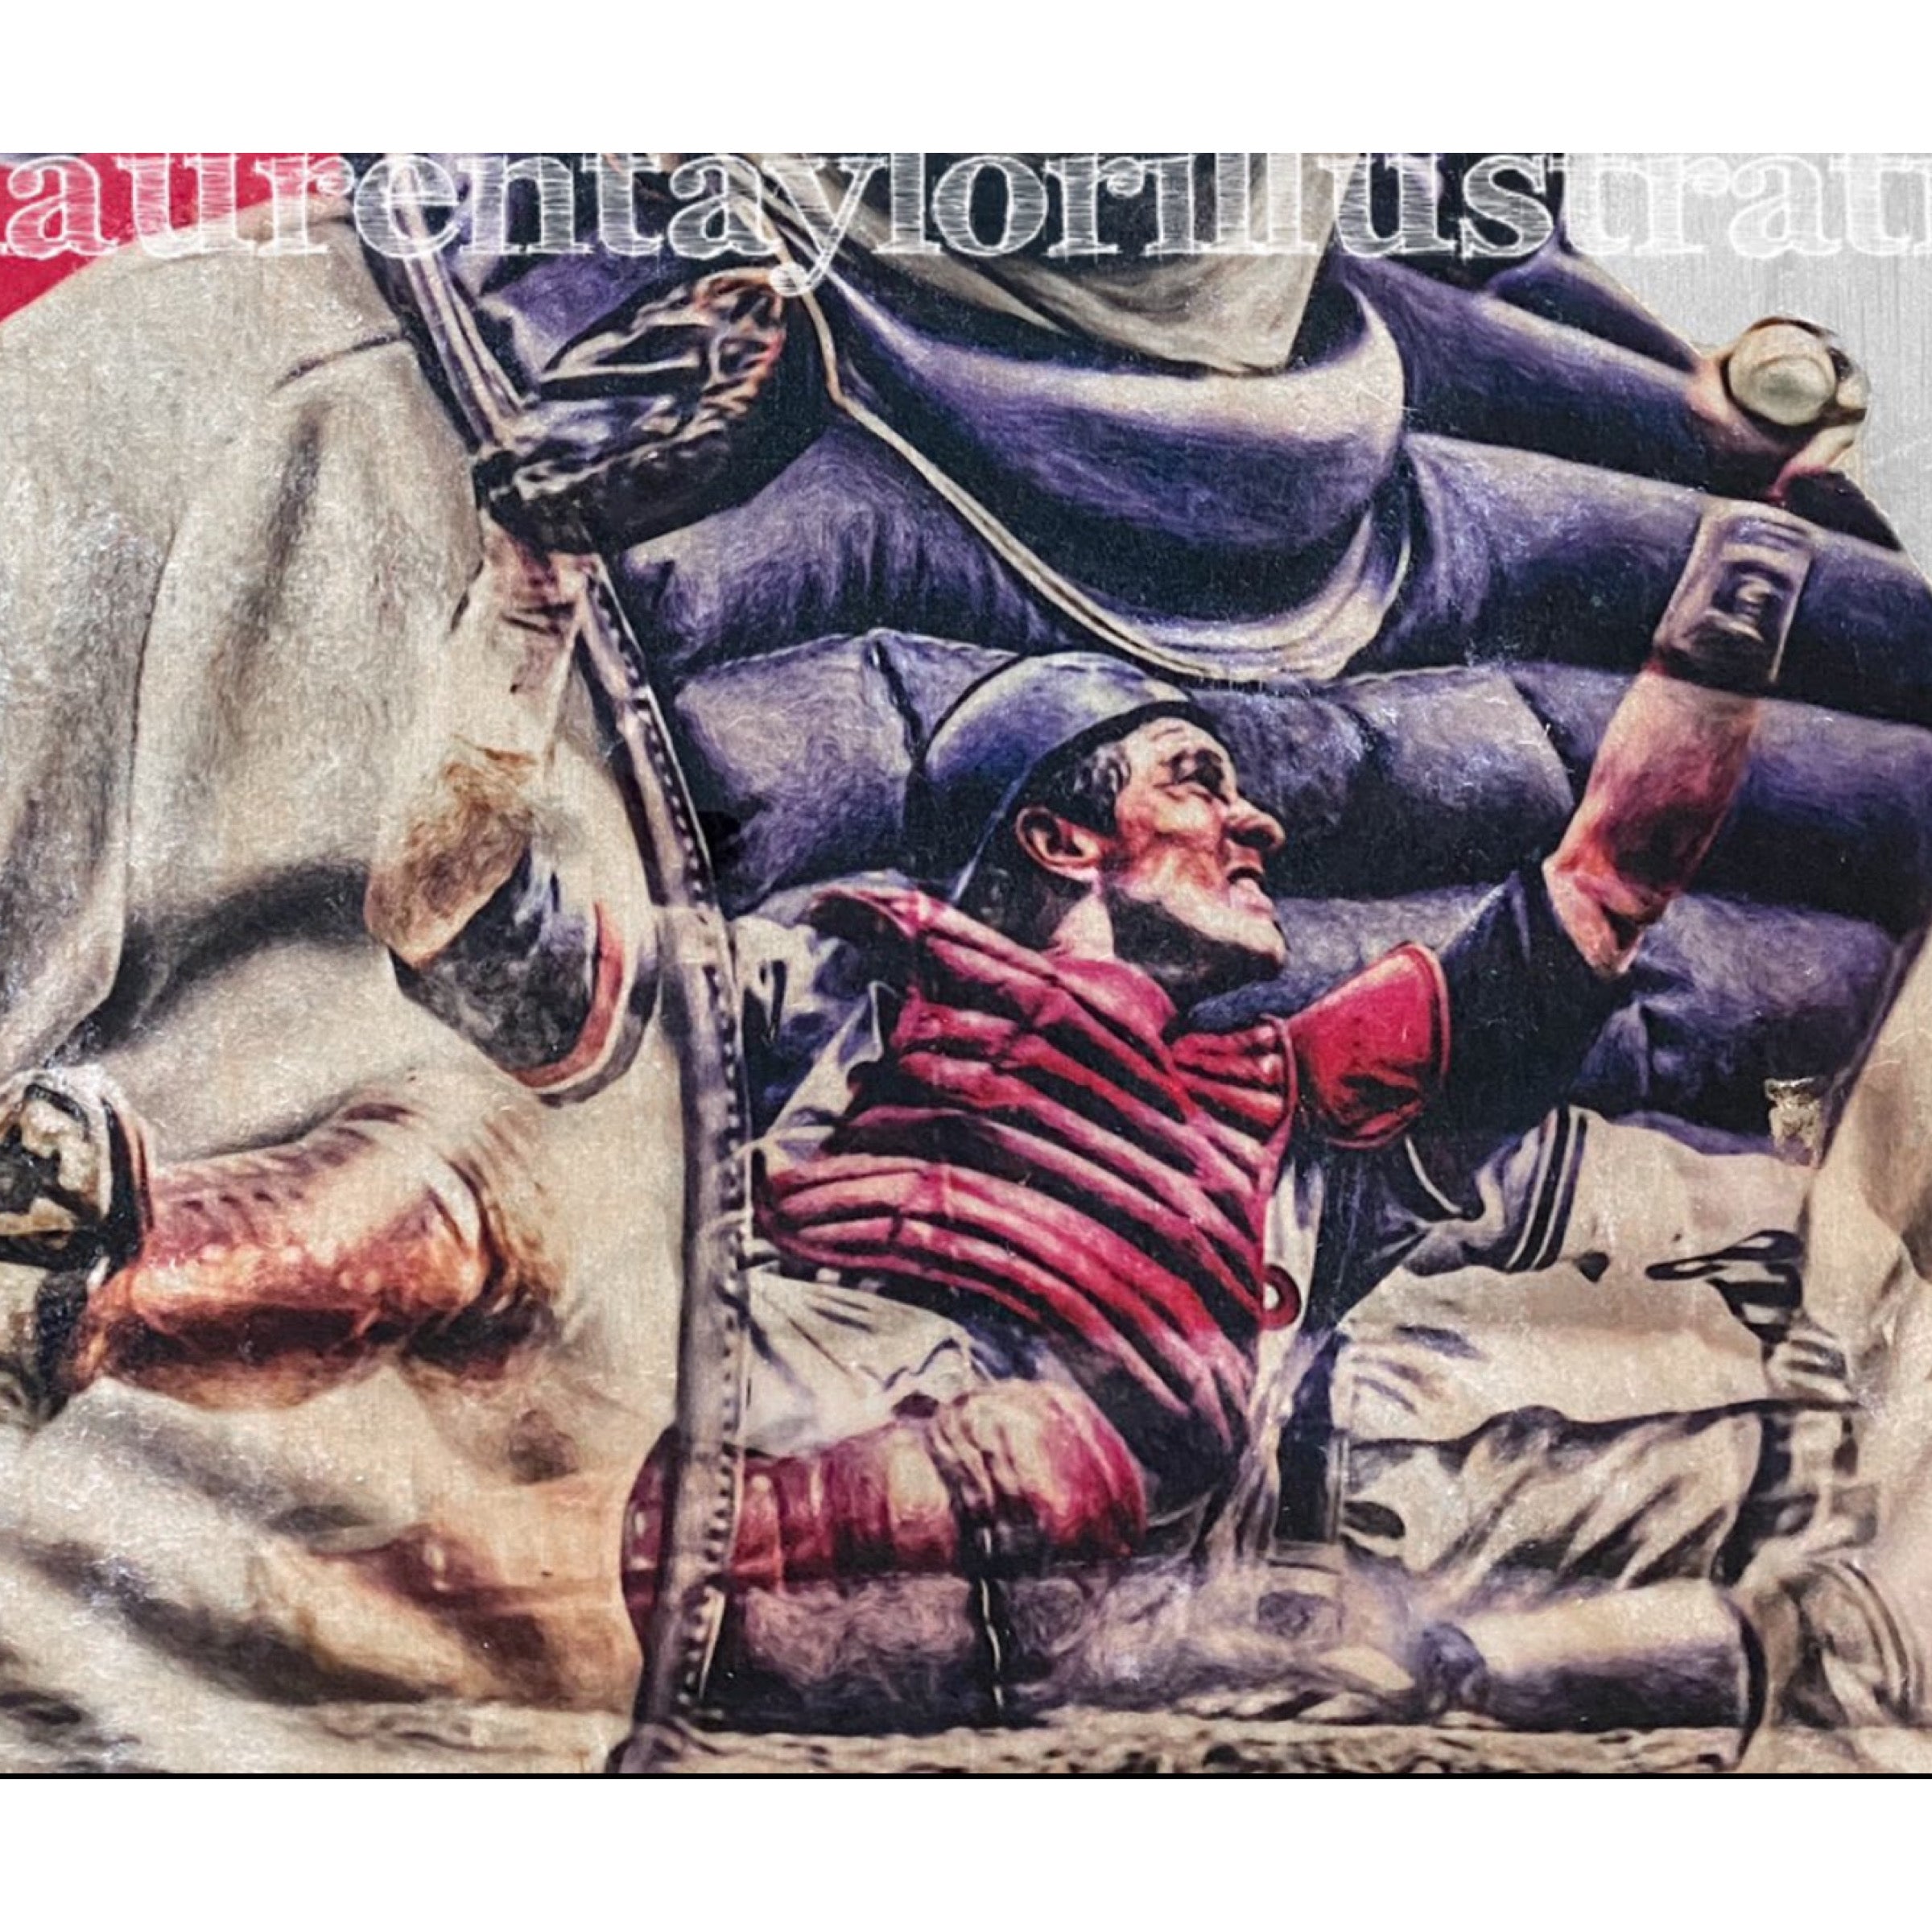 "Gary" (Gary Carter) Montreal Expos - Officially Licensed MLB Cooperstown Collection Print - Limited Release